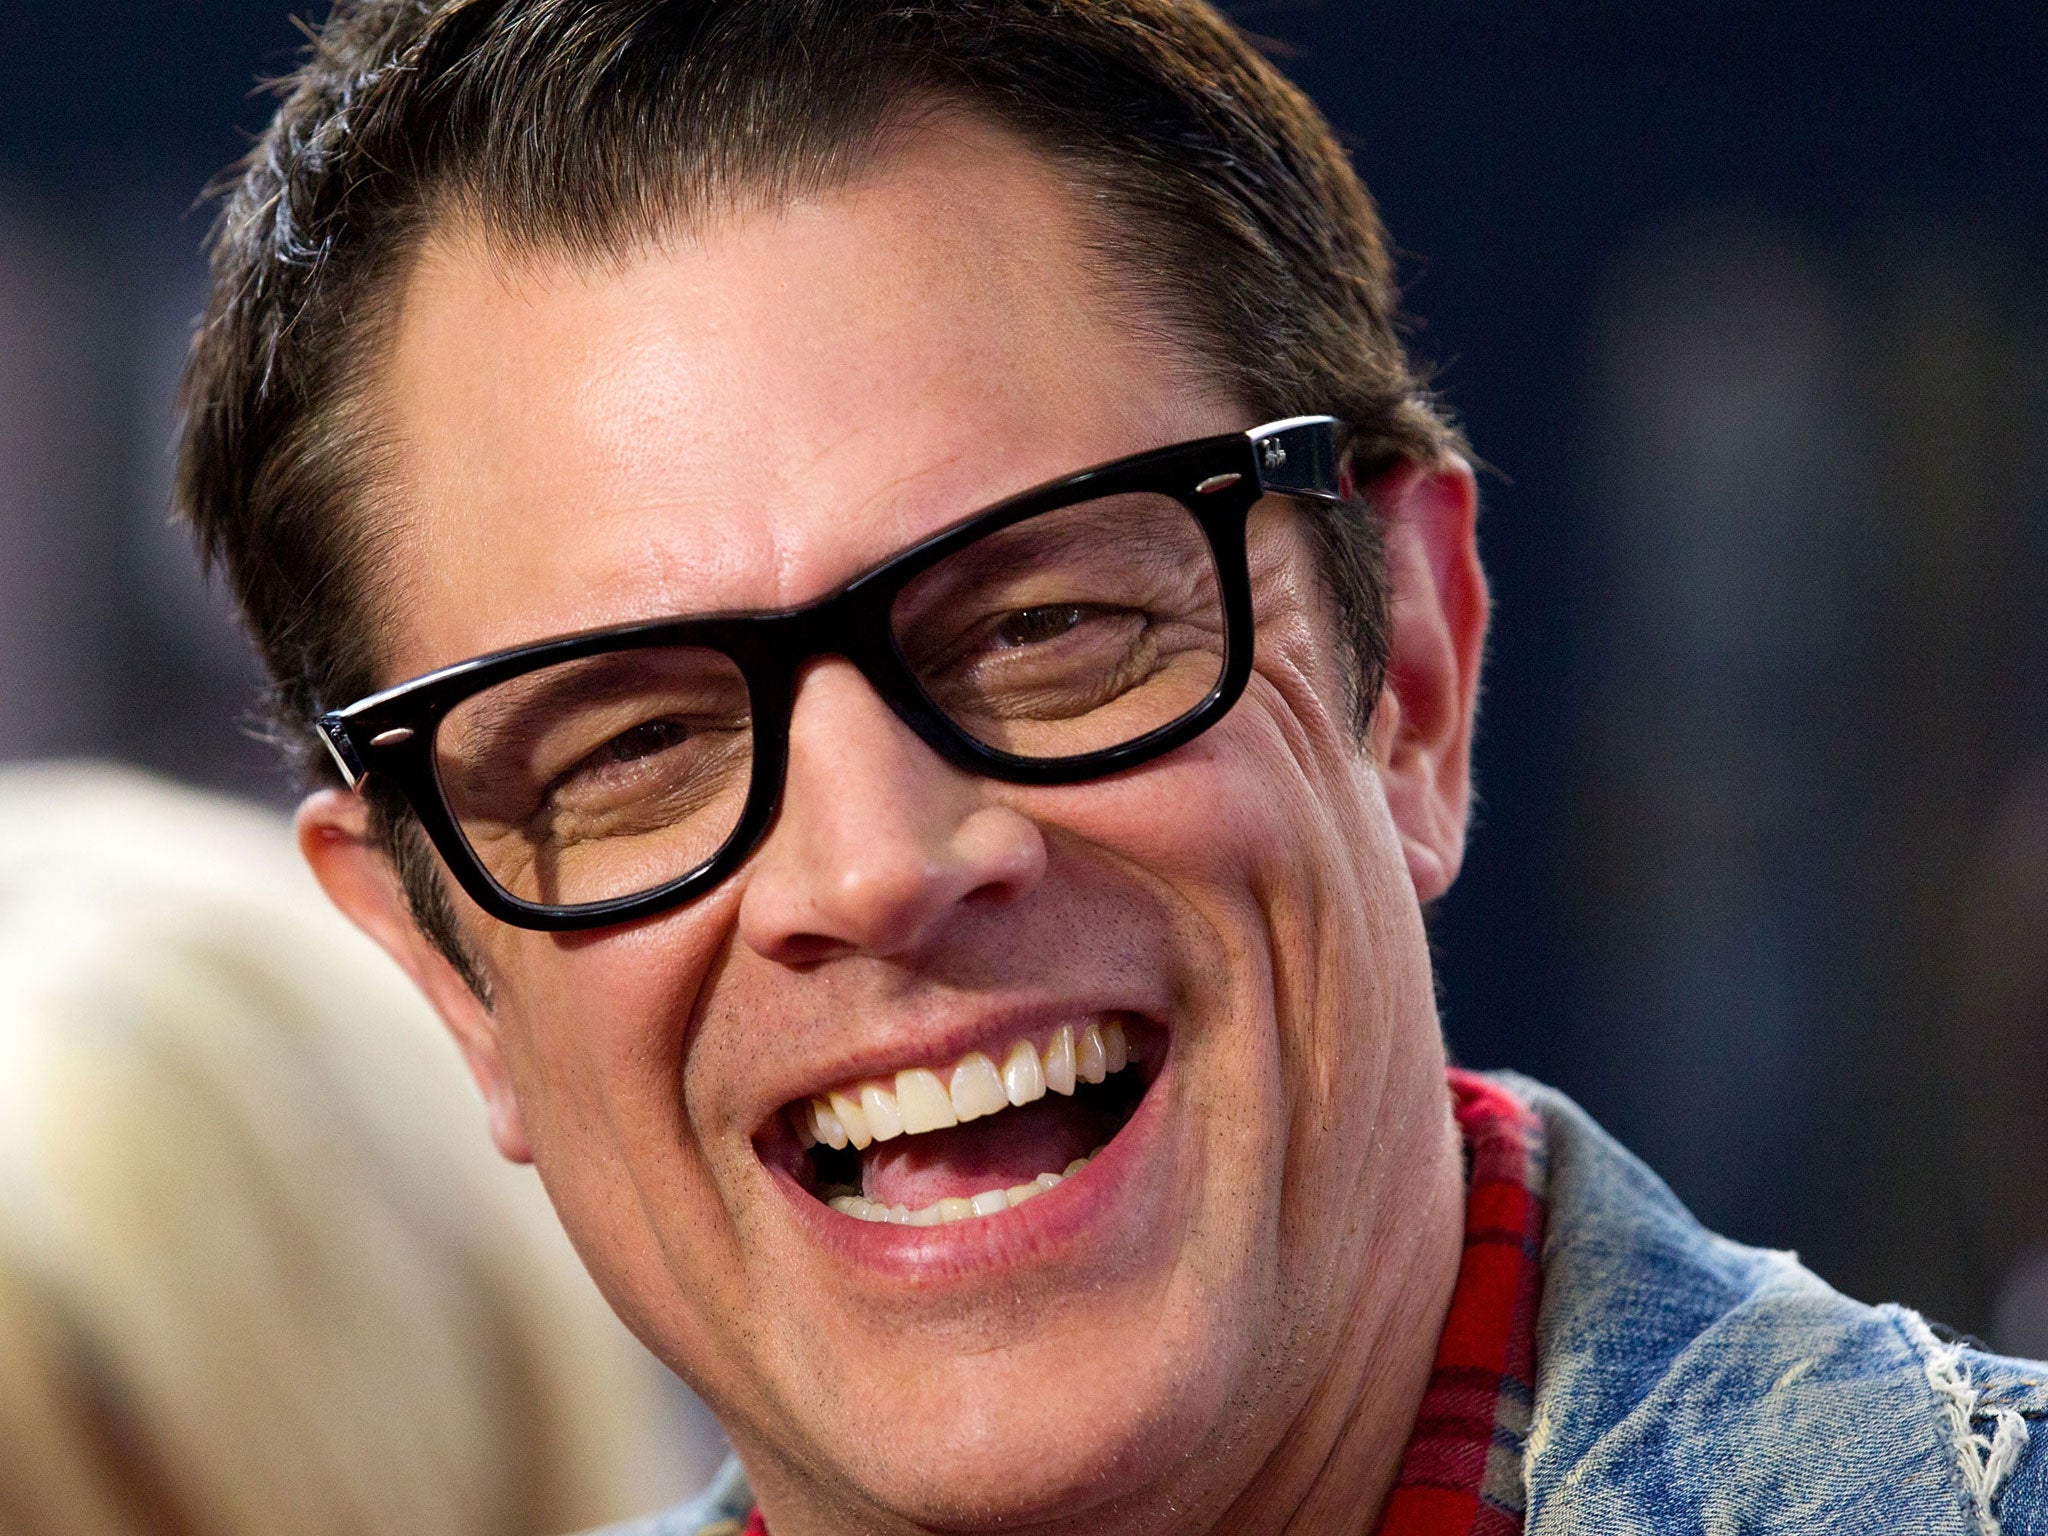 Jackass star Johnny Knoxville has signed on to voice Leonardo in Michael Bay's live-action Teenage Mutant Ninja Turtles reboot